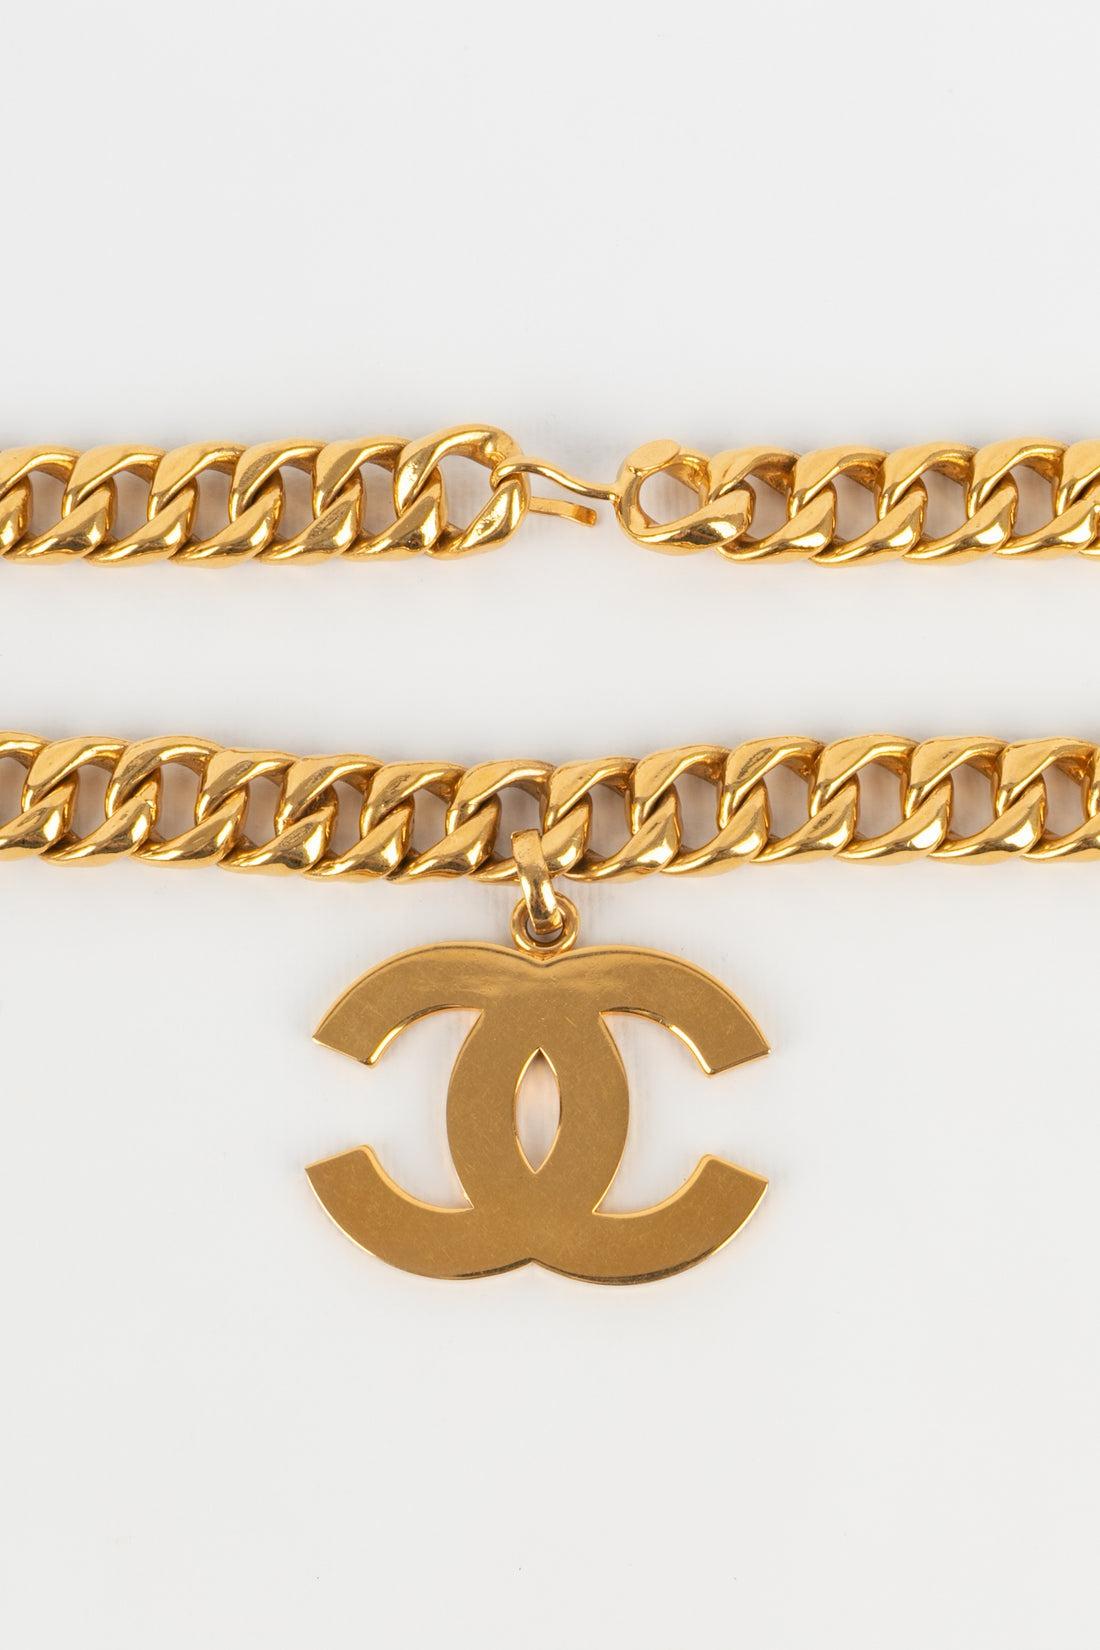 Women's Chanel Golden Metal Necklace with CC Pendant, 1993 For Sale